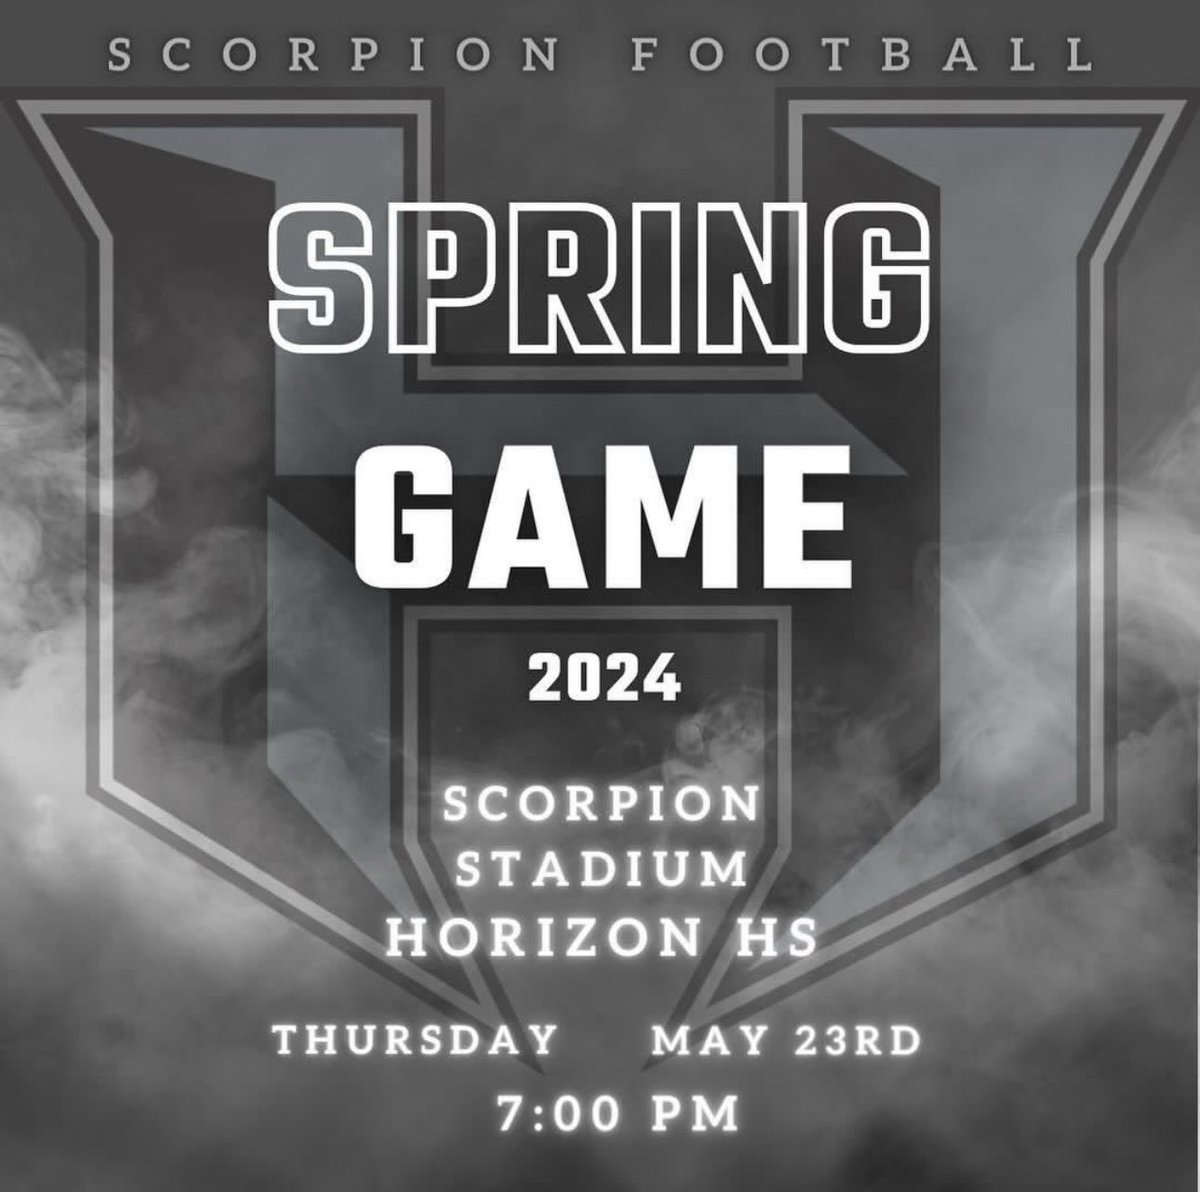 Come out and see what these new Scorpions are all about!! Horizon community, get behind these hard working dudes and see #TheBrand for yourselves!! Going to be a fun preview to the fall!! 🏈🦂🔥